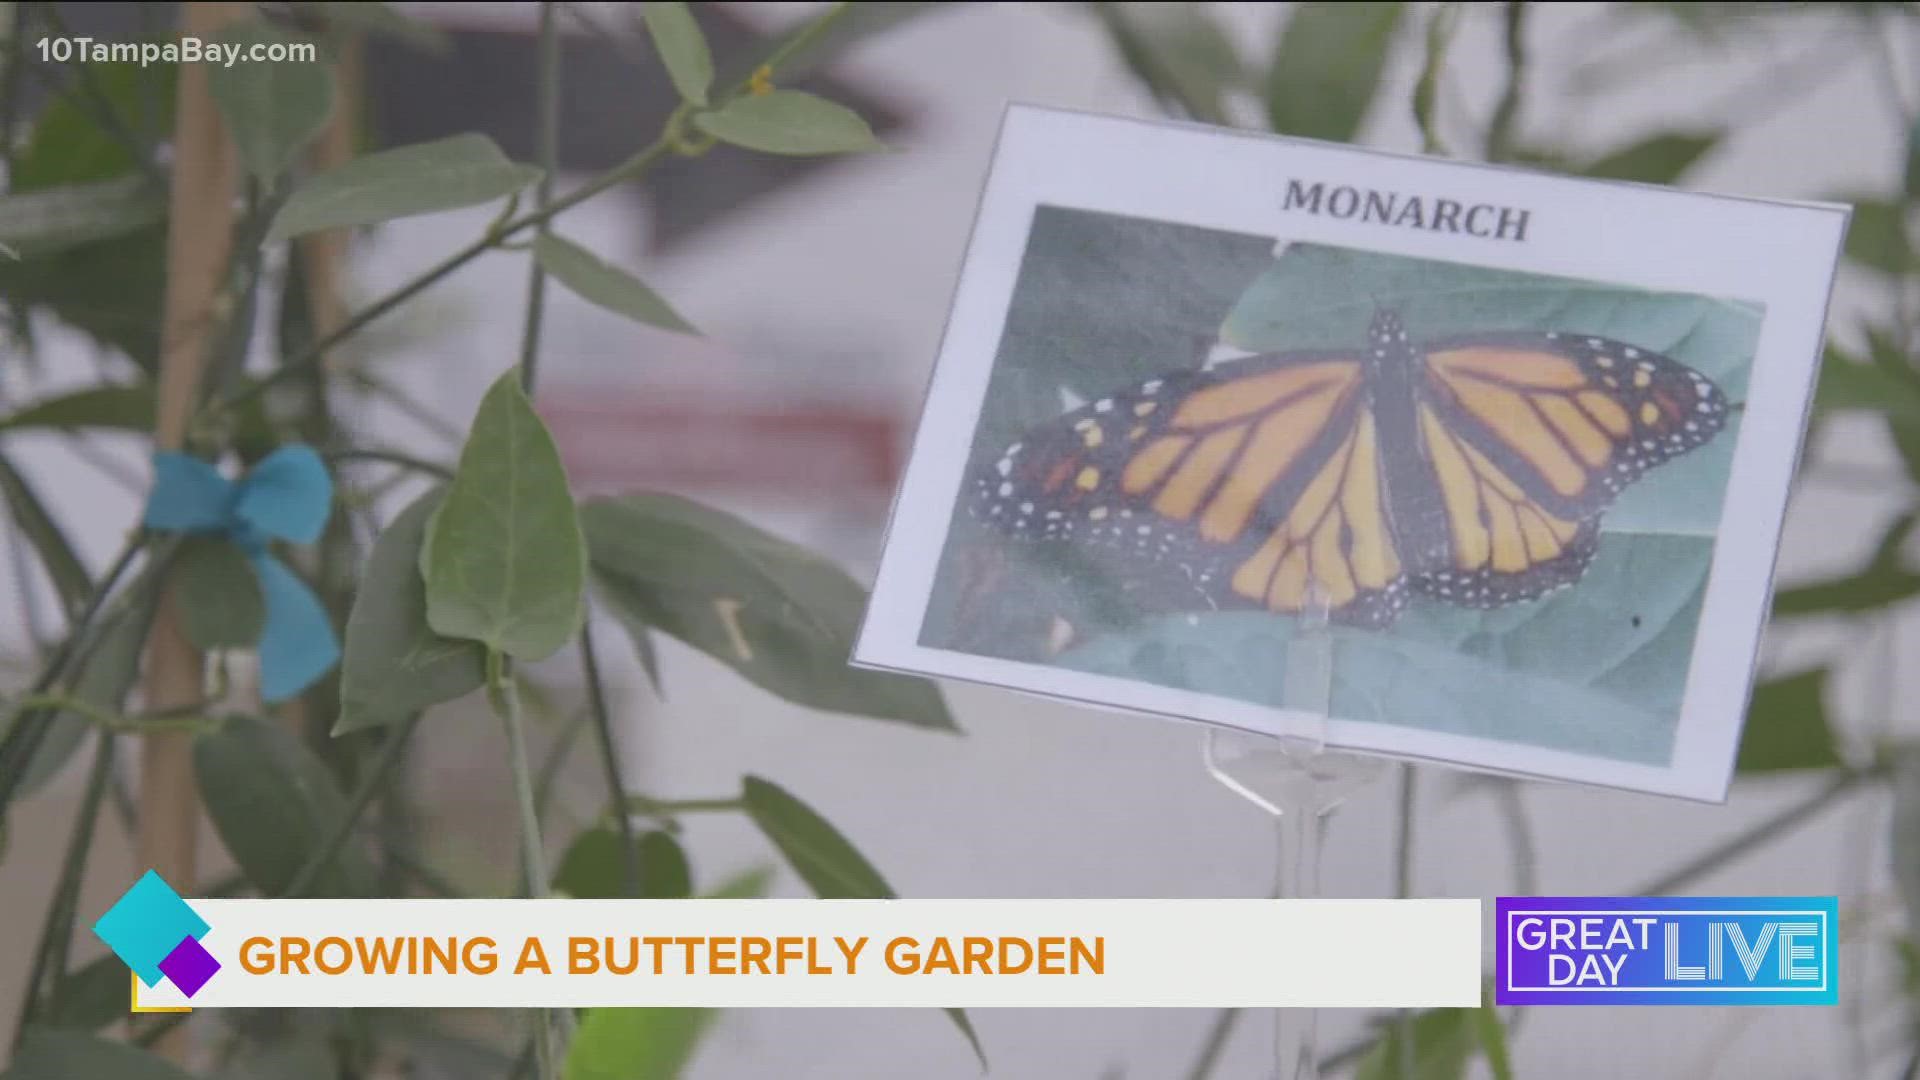 Anita Camacho from Little Red Wagon Nursery joined us with tips for growing a butterfly garden with native plants.